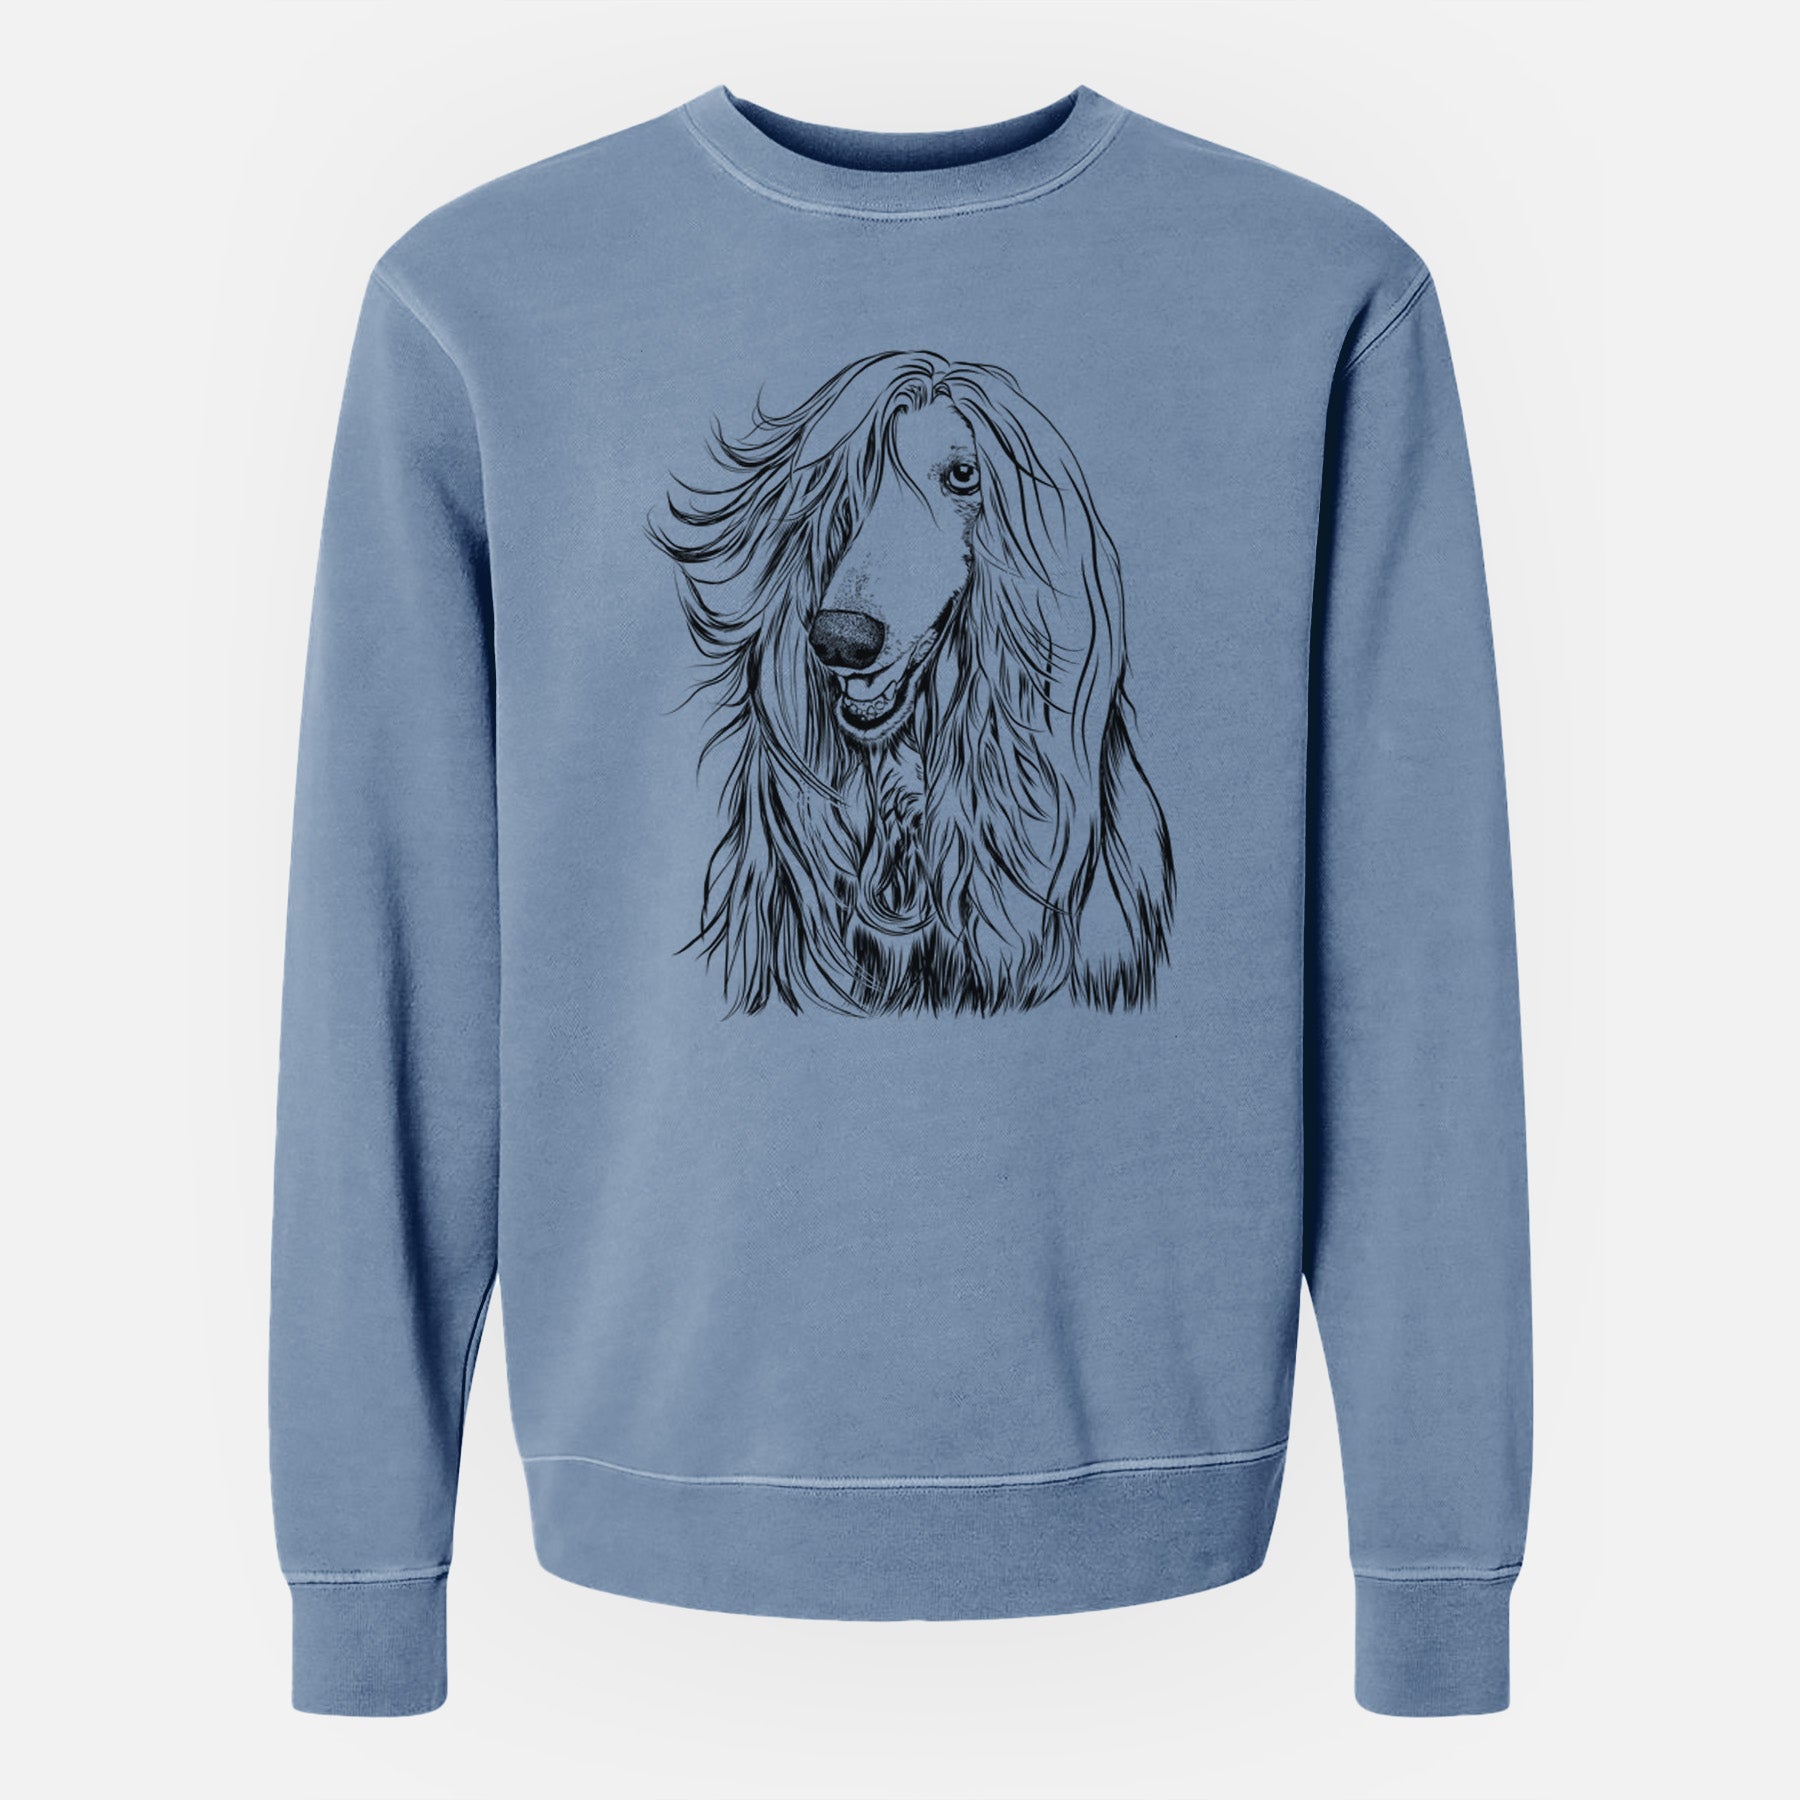 Bare Sterling the Afghan Hound - Unisex Pigment Dyed Crew Sweatshirt